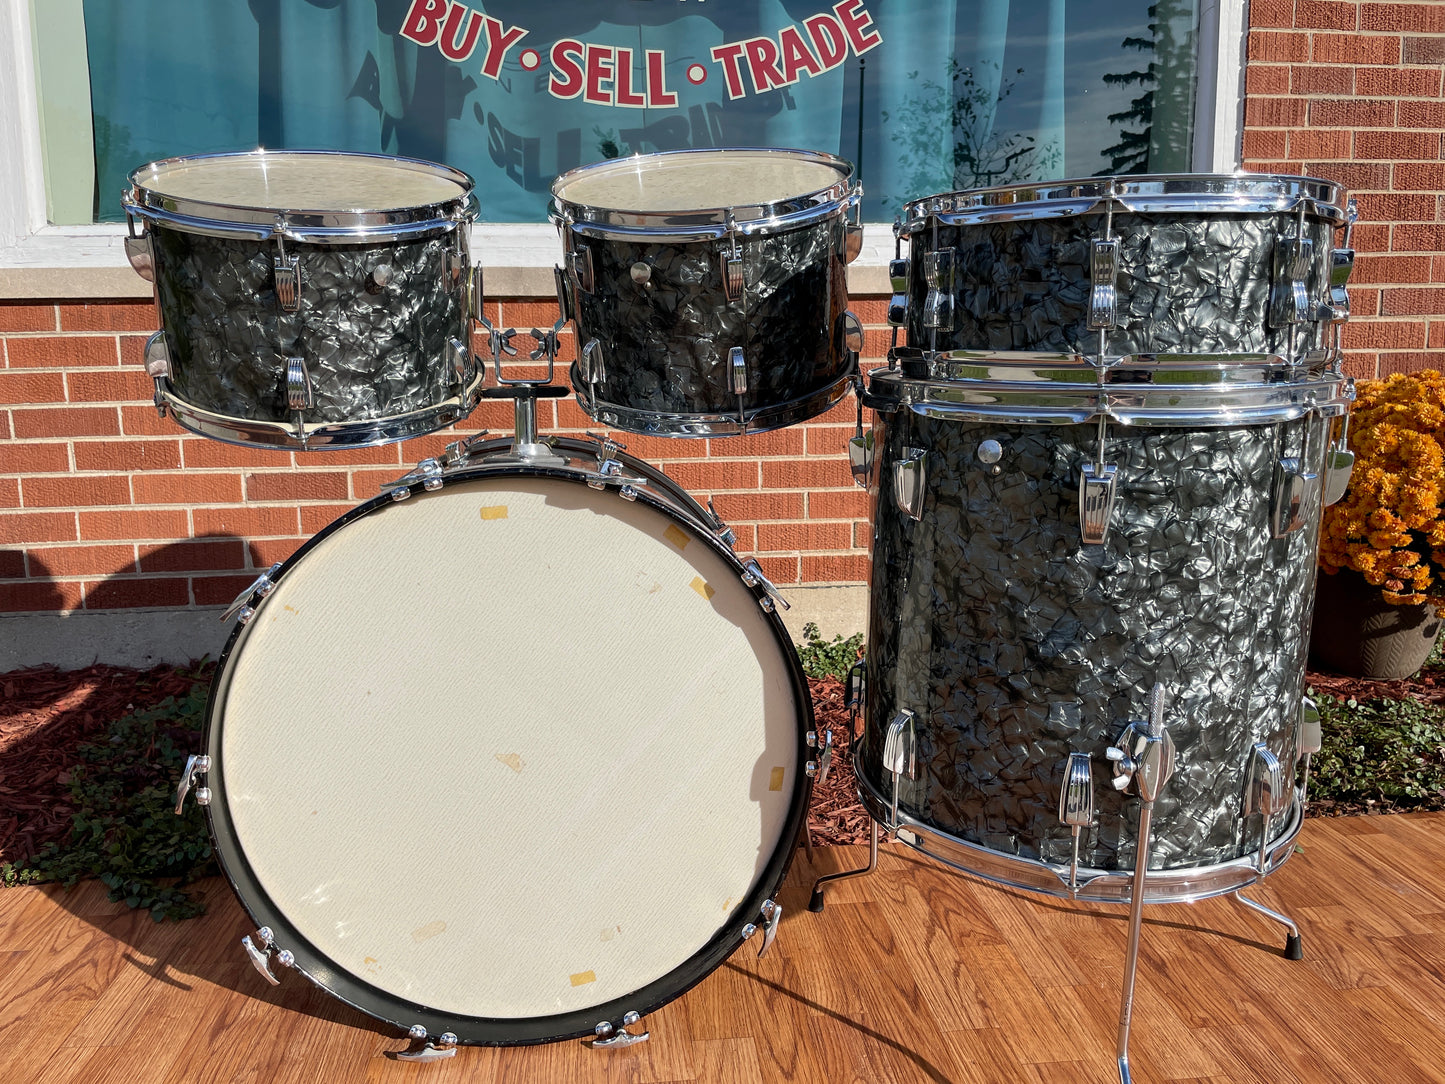 1961 Ludwig No. 983P 5pc Hollywood Outfit Drum Set w/ Jazz Festival Snare Black Diamond Pearl 22/12/12/16/5x14